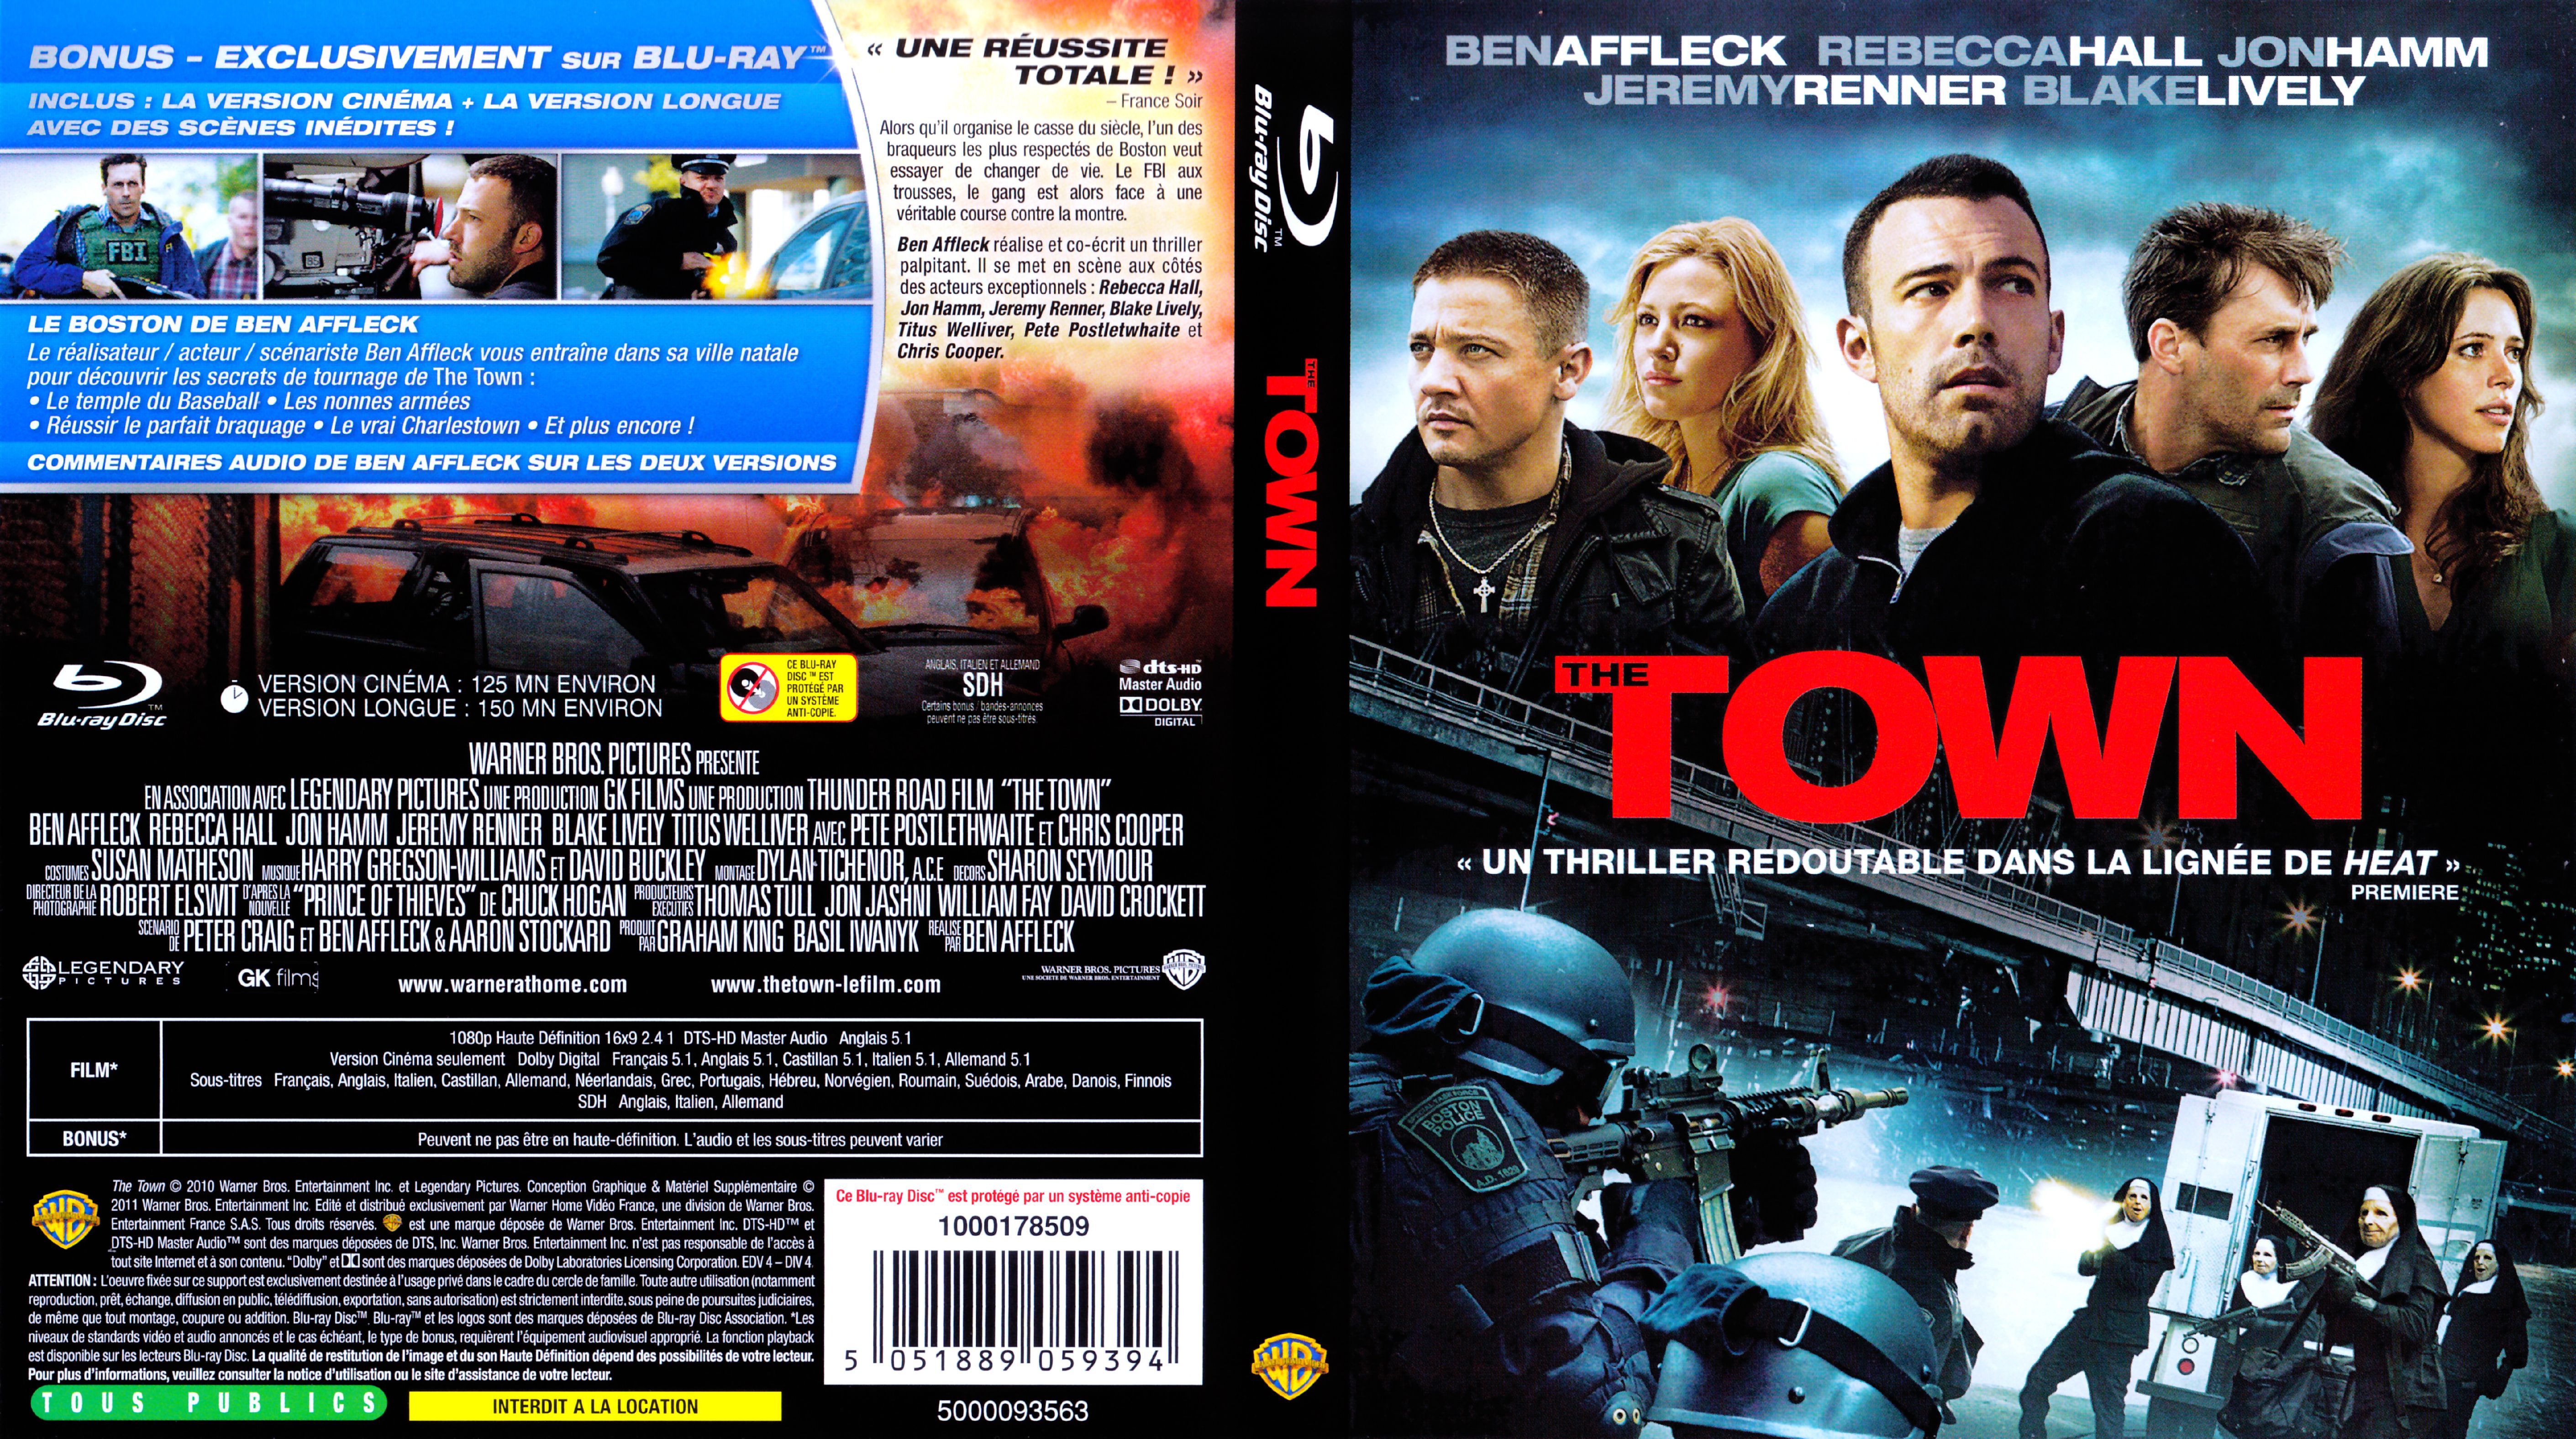 Jaquette DVD The town (BLU-RAY) v2